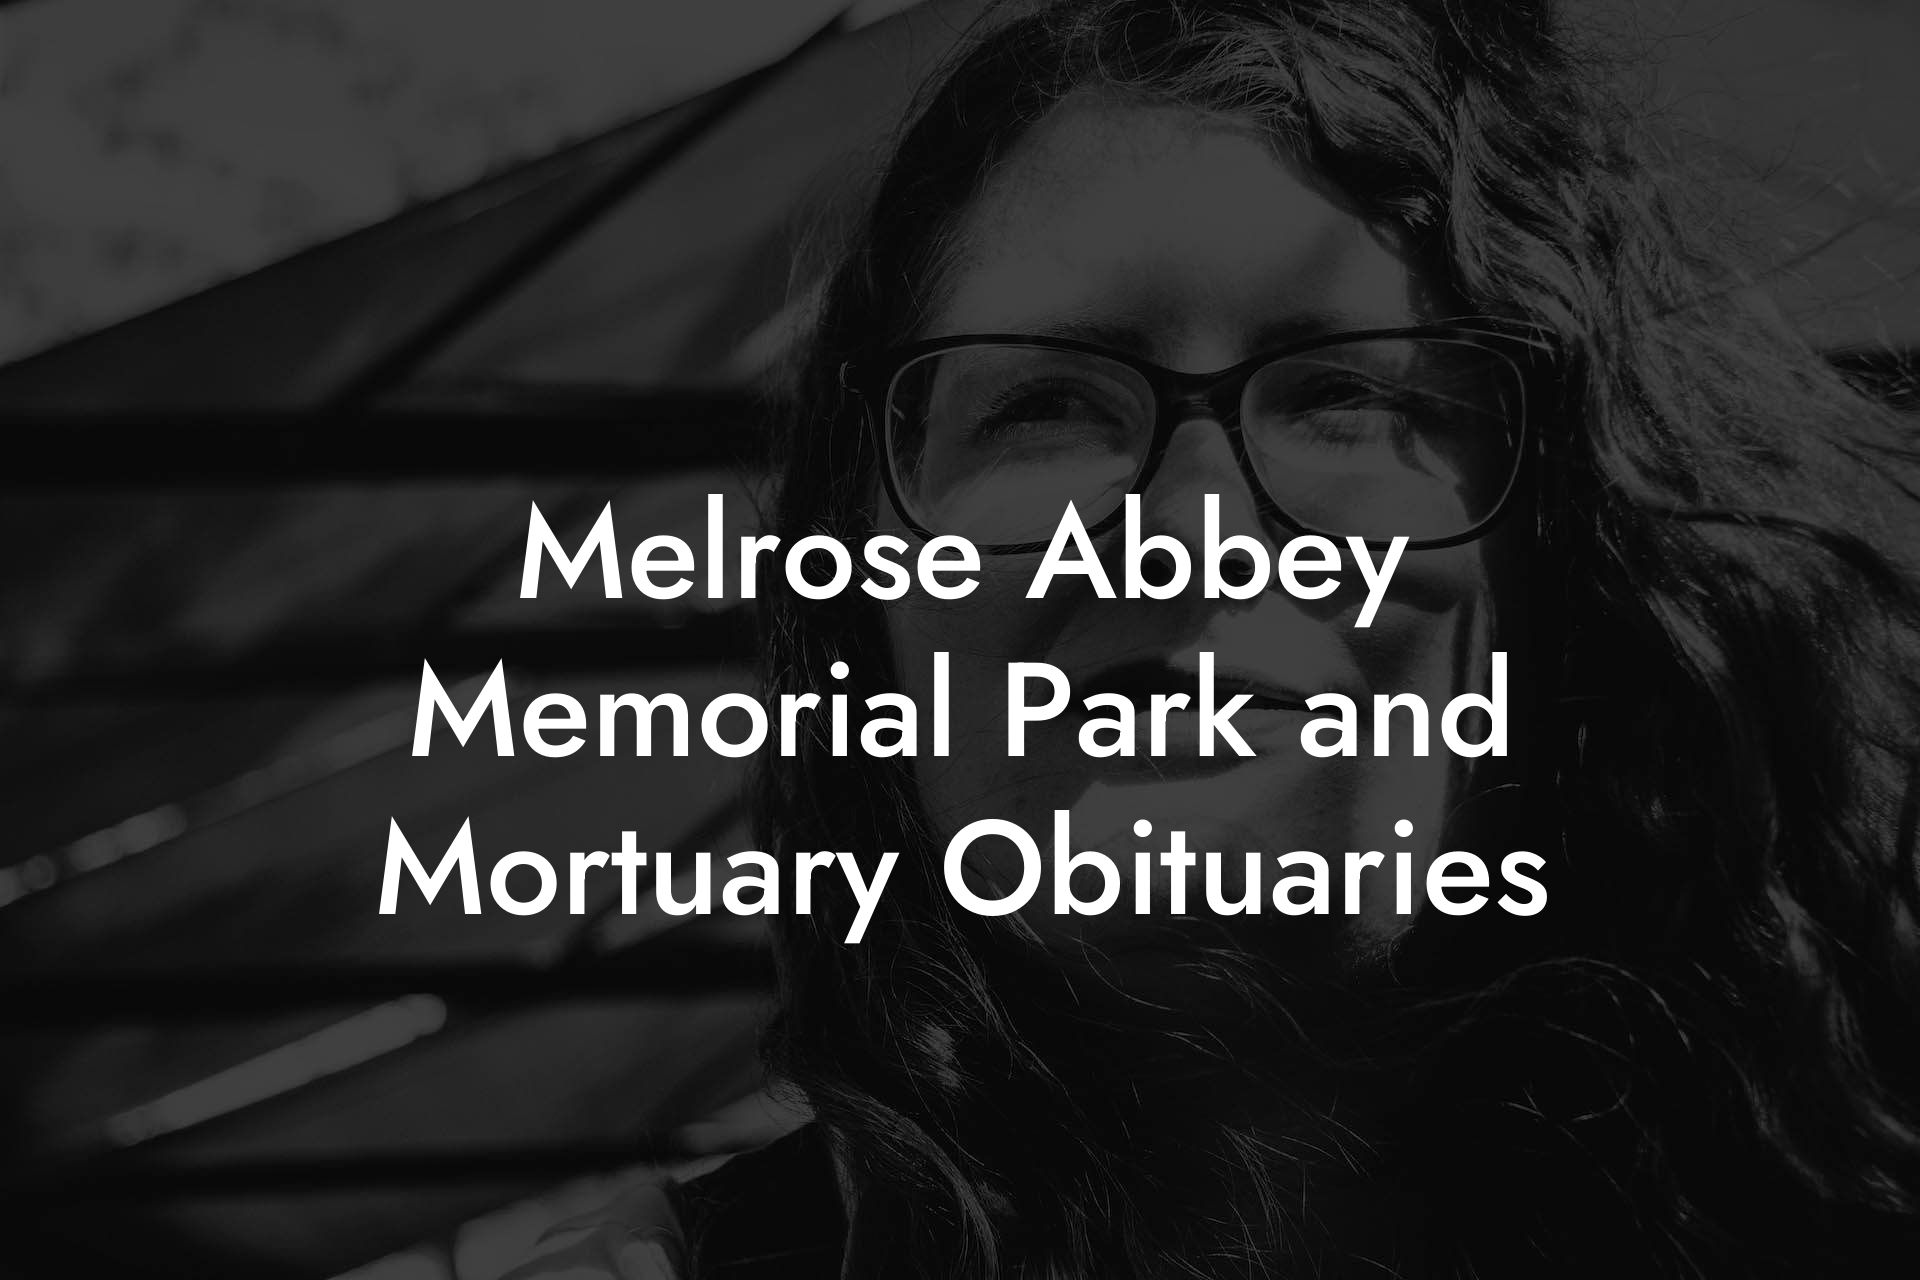 Melrose Abbey Memorial Park and Mortuary Obituaries